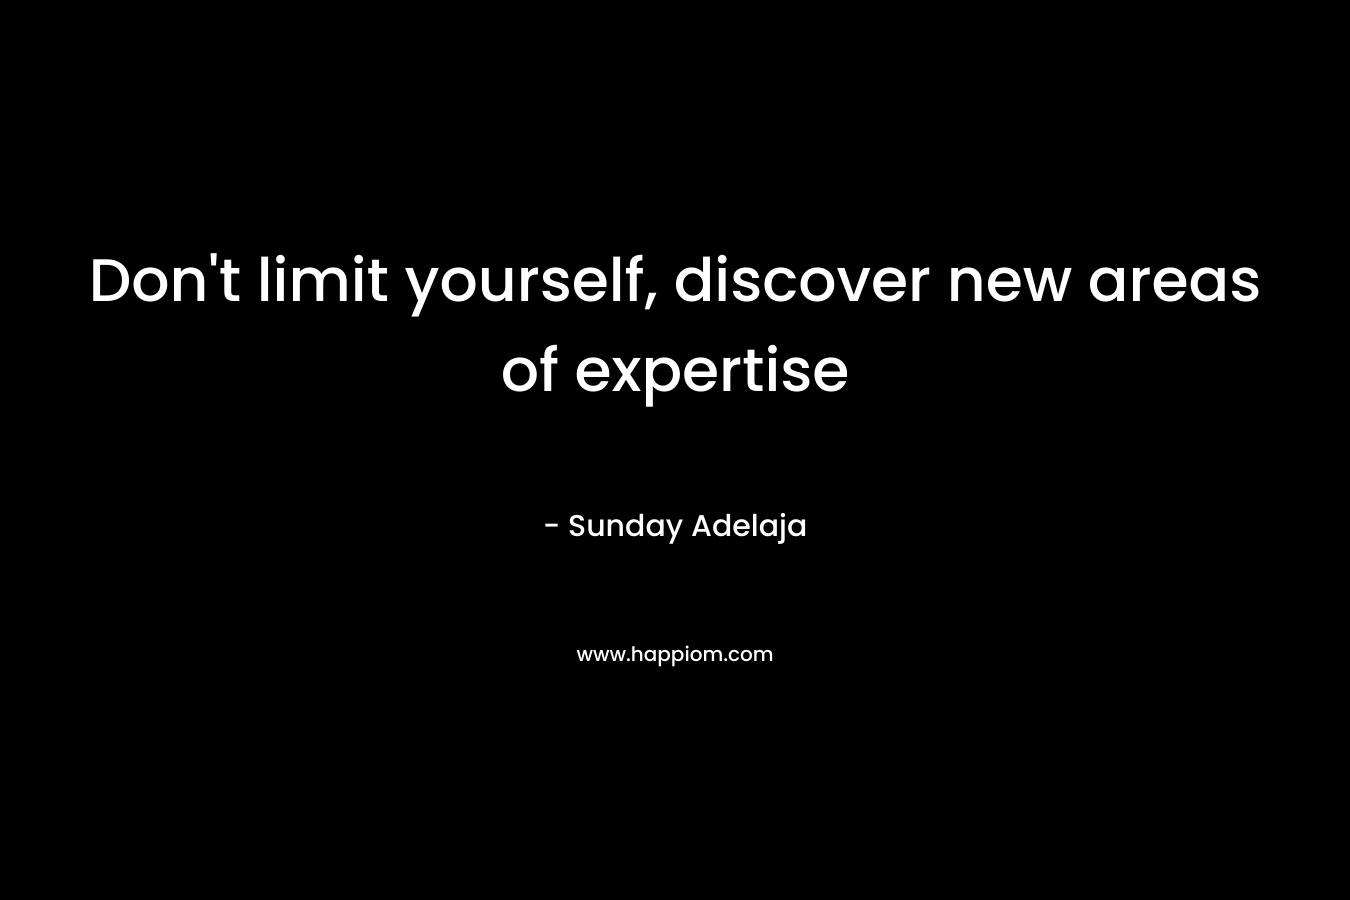 Don't limit yourself, discover new areas of expertise